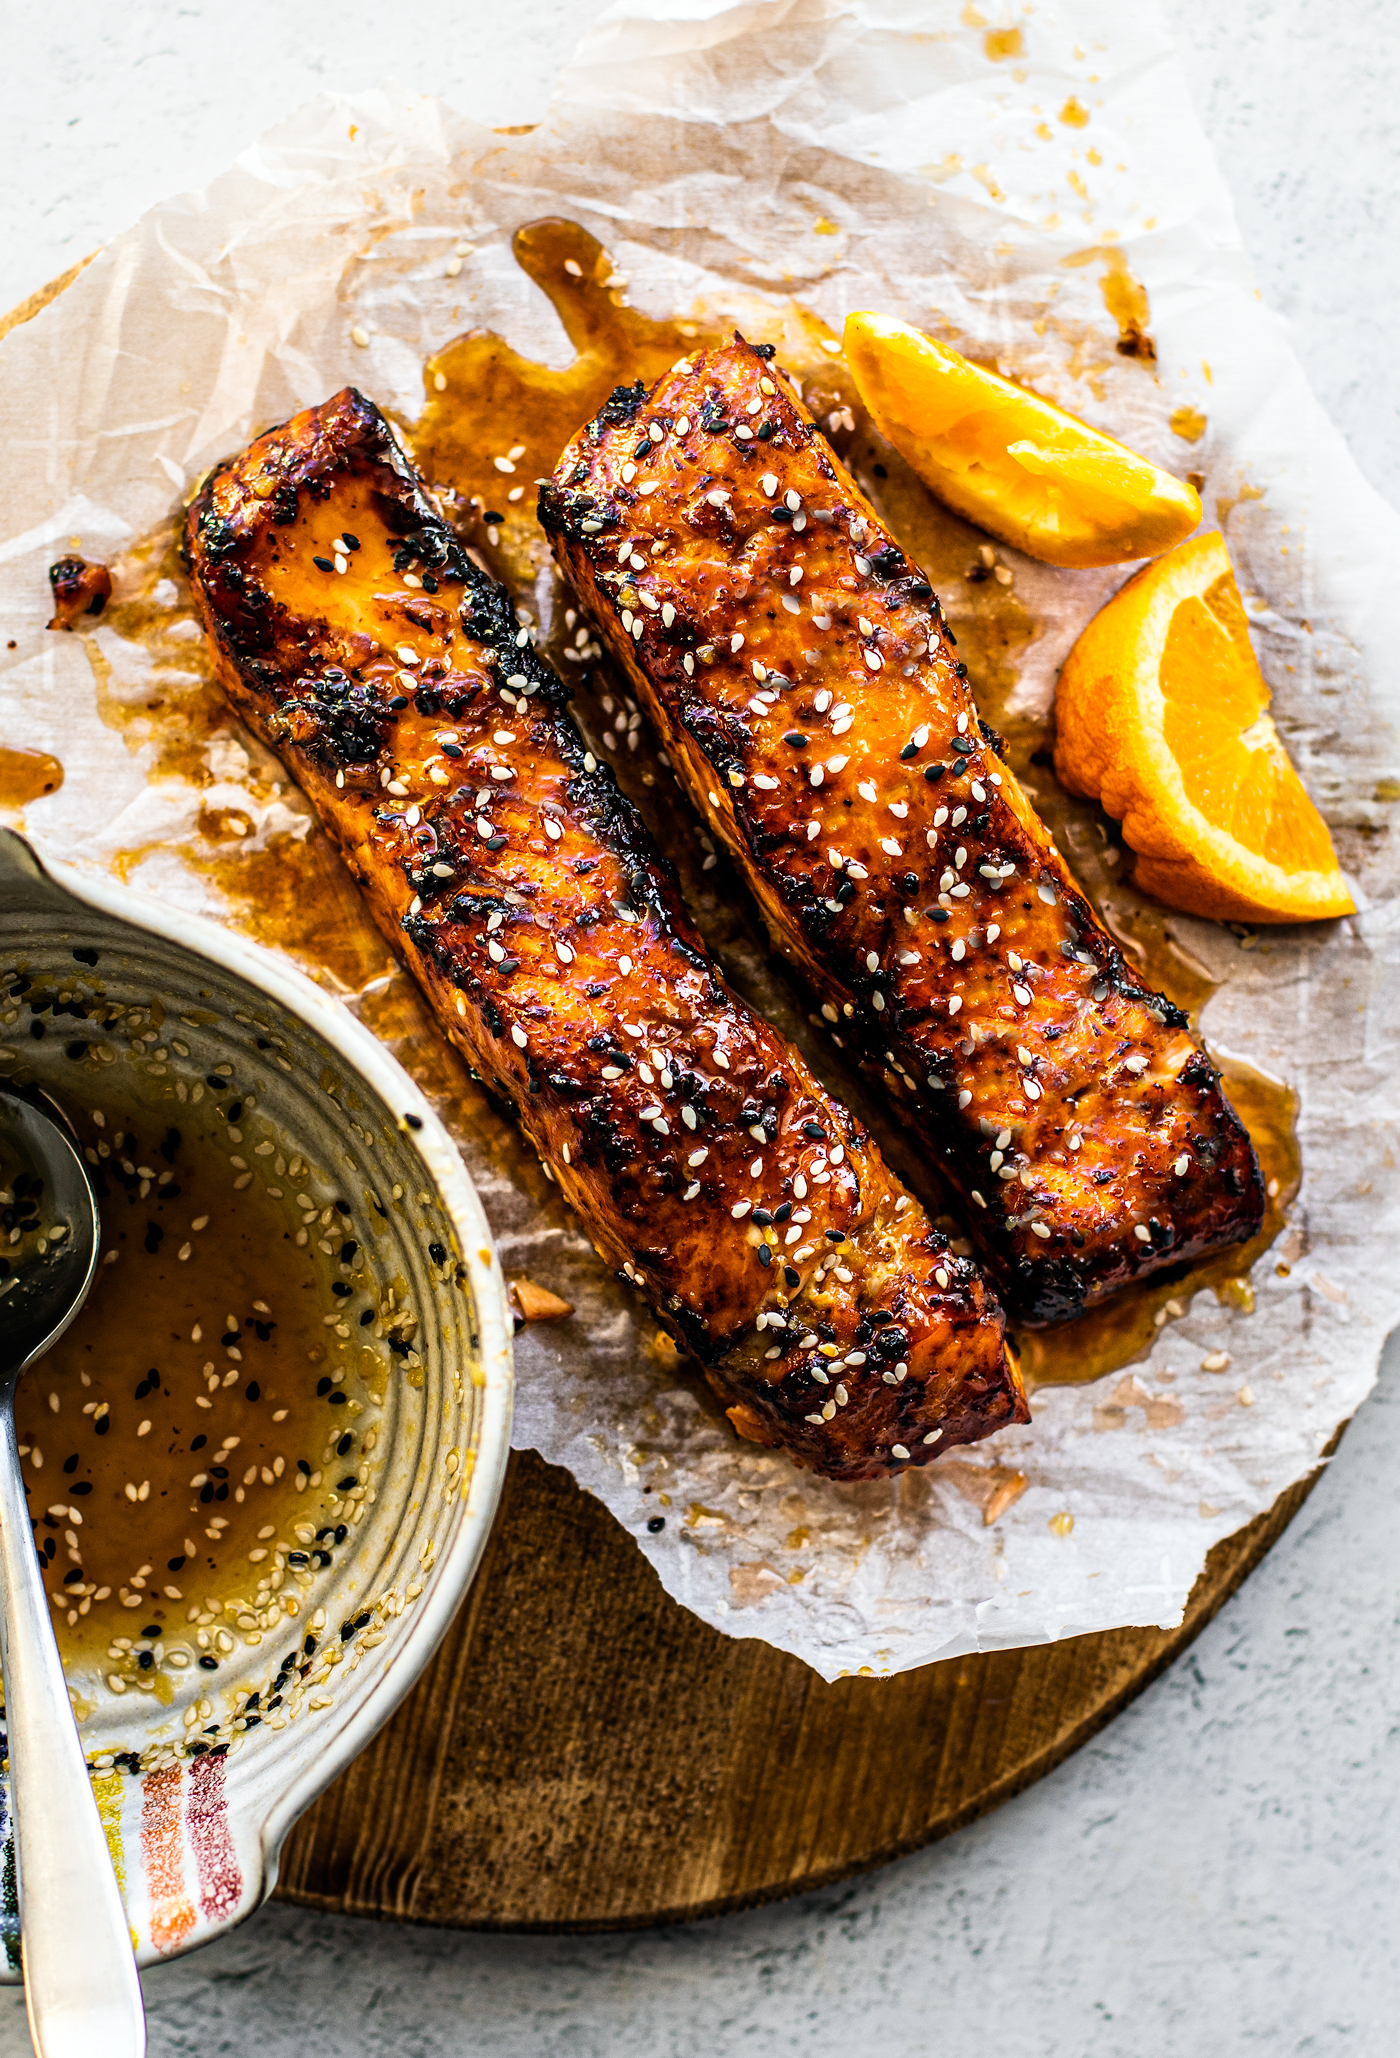 Caramelized salmon fillets on parchment over a cutting board with bowl of glaze next to it.